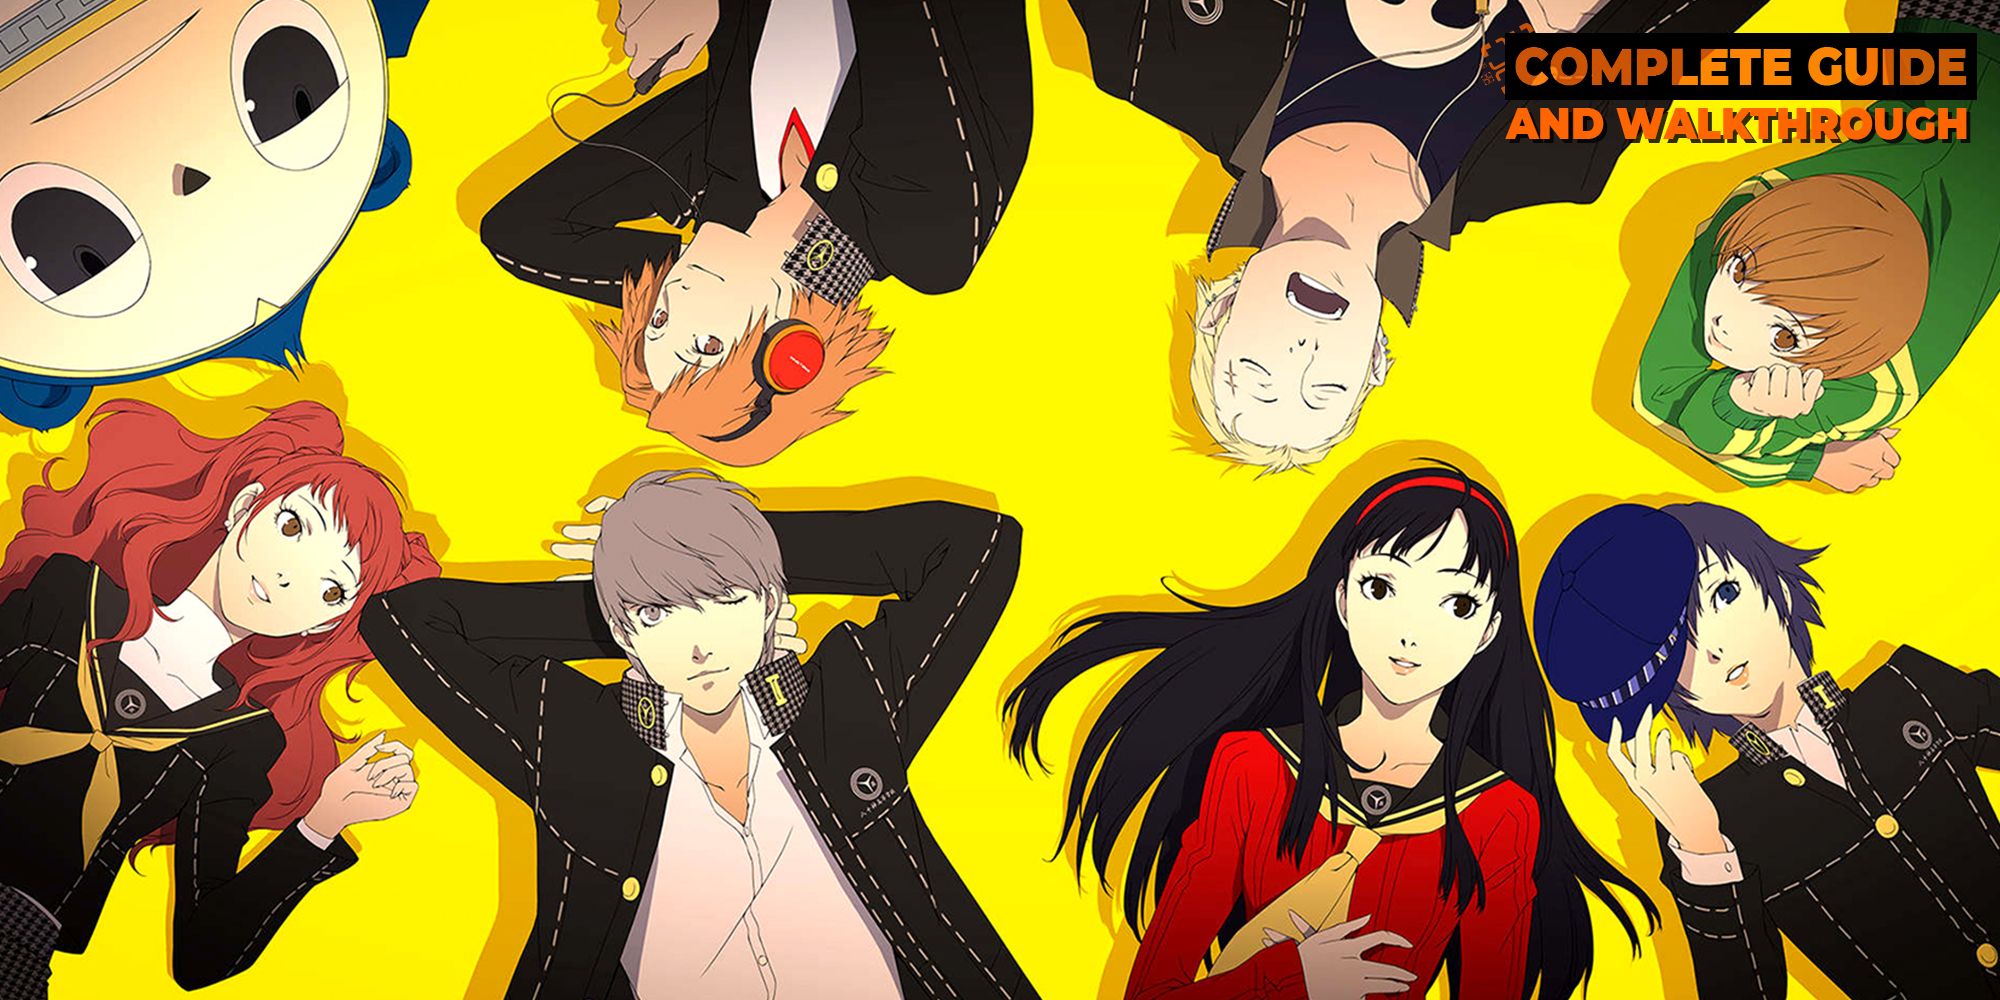 teddie, yosuke, kanji, chie, naoto, yukiko, yu, and rise with our complete guide and walkthrough overlay for our persona 4 golden directory